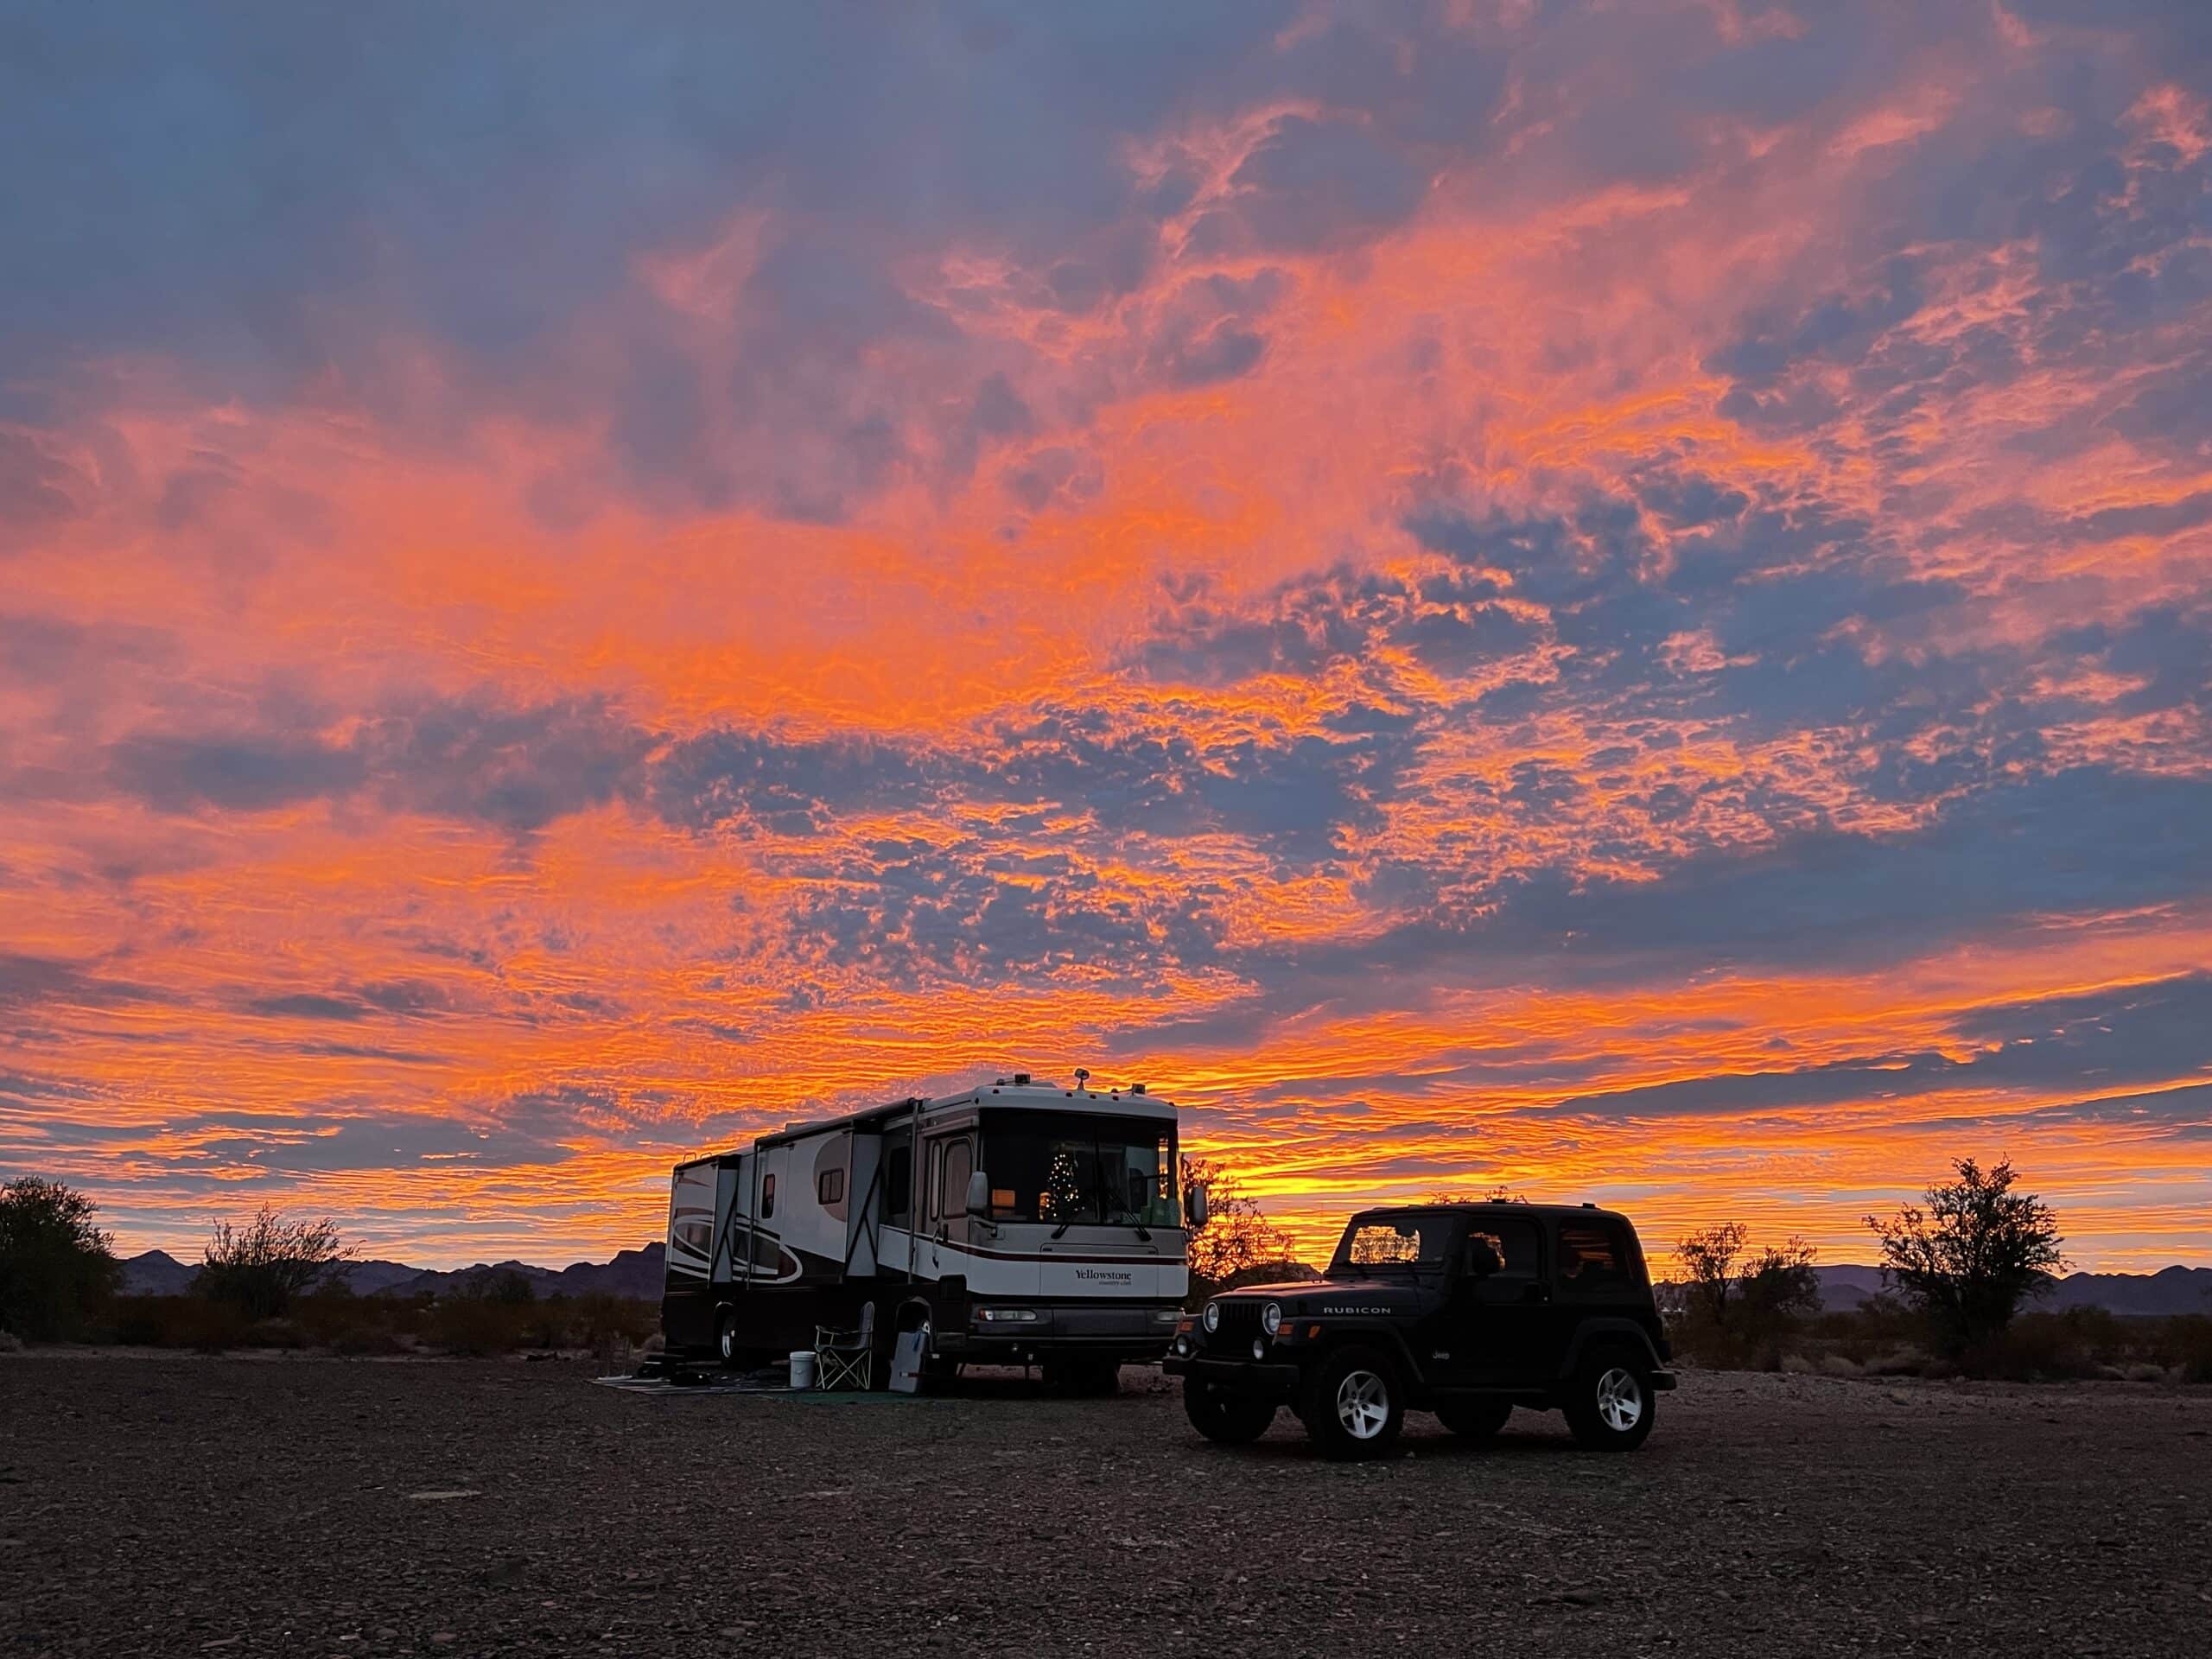 Jeep parked in front of large RV with orange sunset